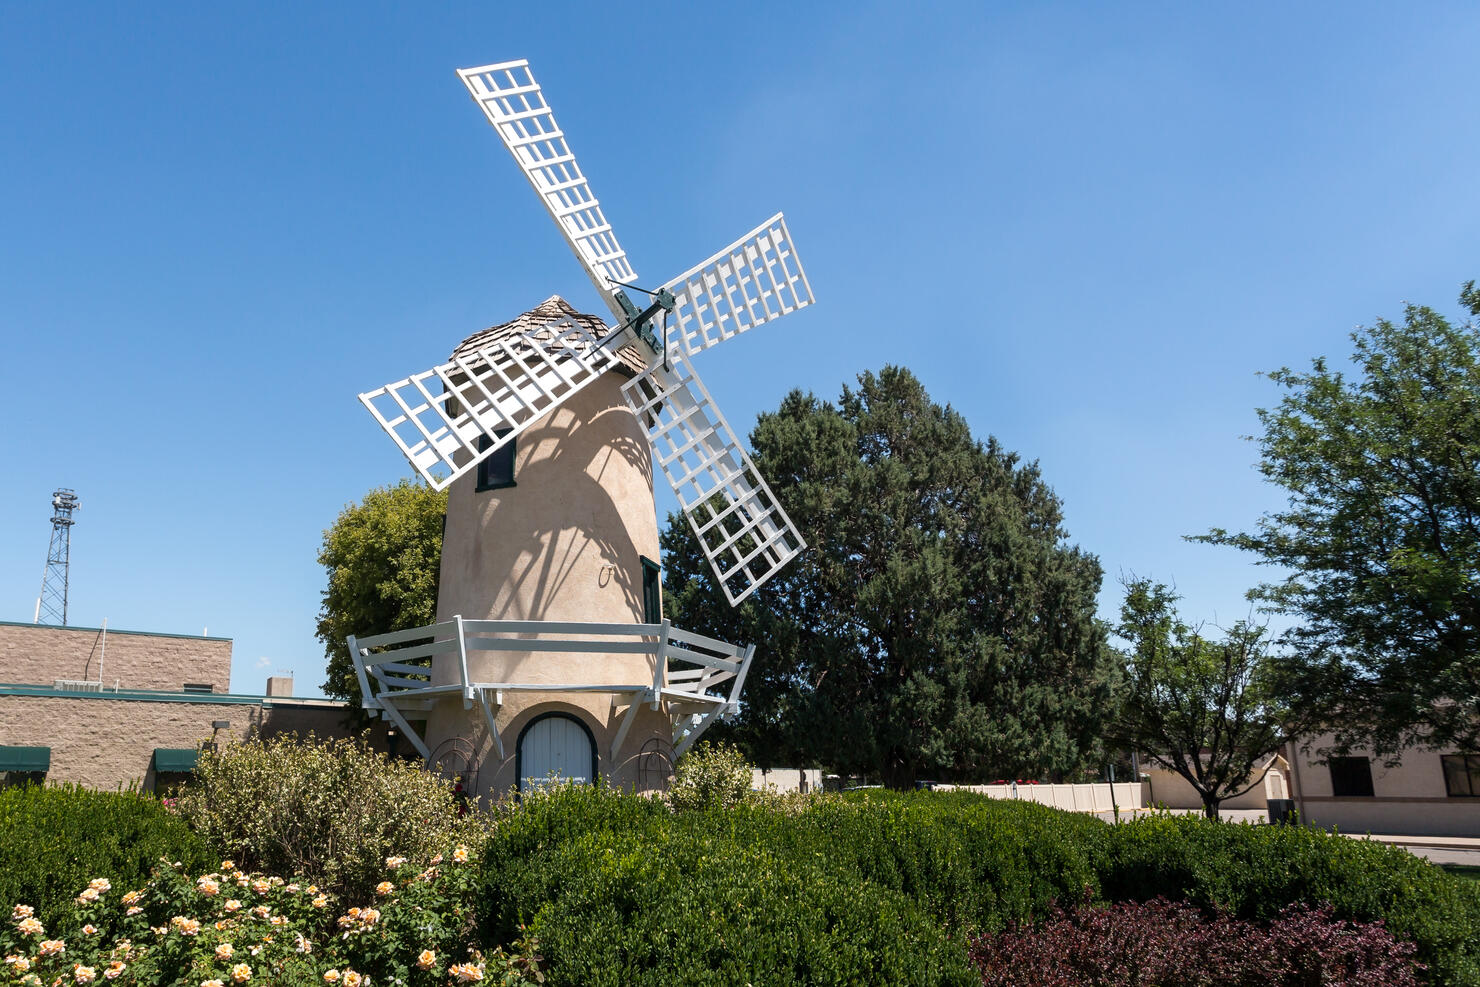 Holland Wilson windmill, now in the Emick's collections of the antique windmills. Located in the Lamar downtown, Colorado